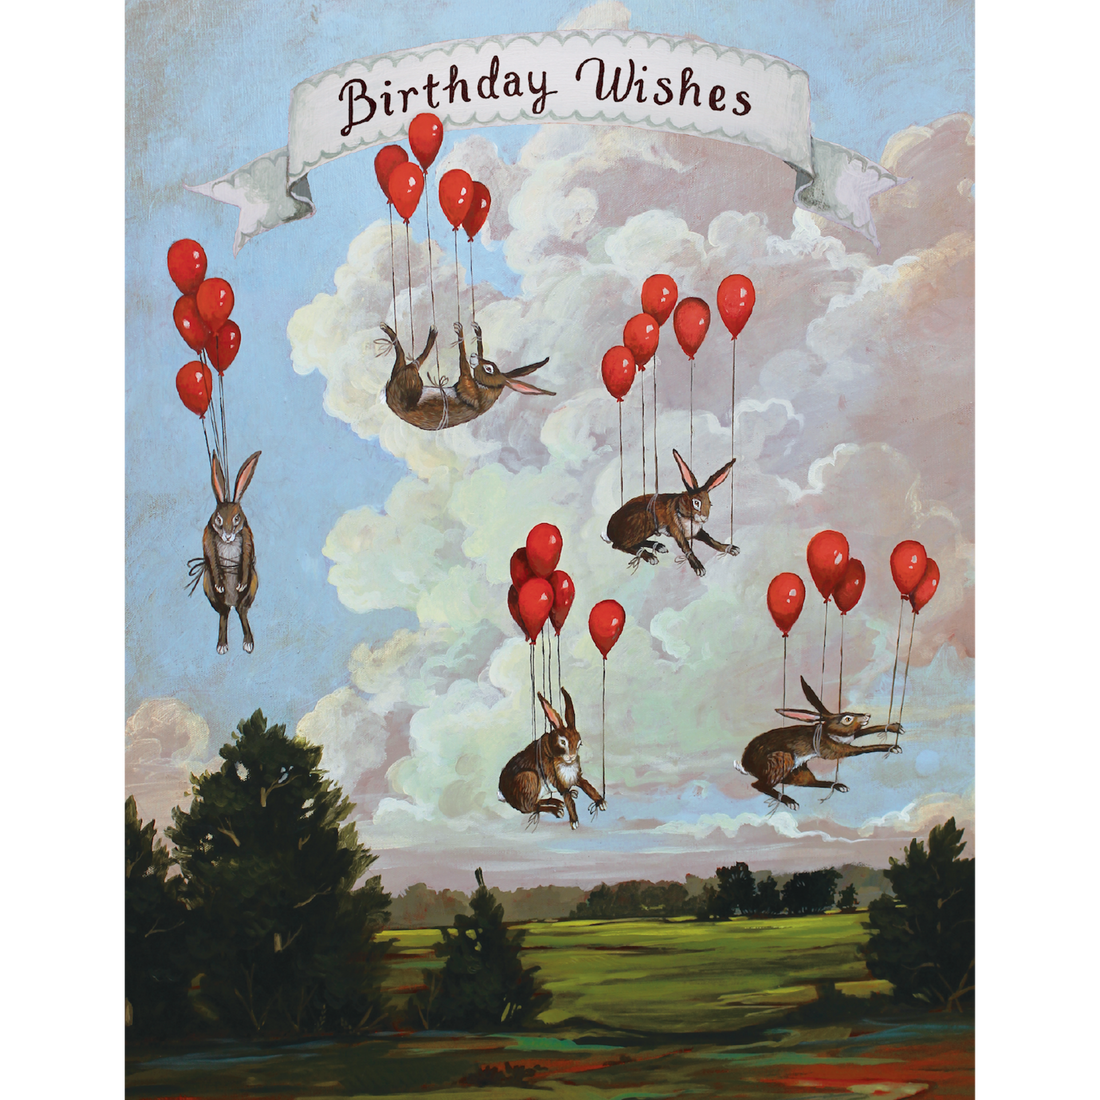 A whimsical illustration of five brown rabbits floating through the cloudy blue sky by the strings of red balloons over a green landscape, with a banner reading &quot;Birthday Wishes&quot; across the top of the card.